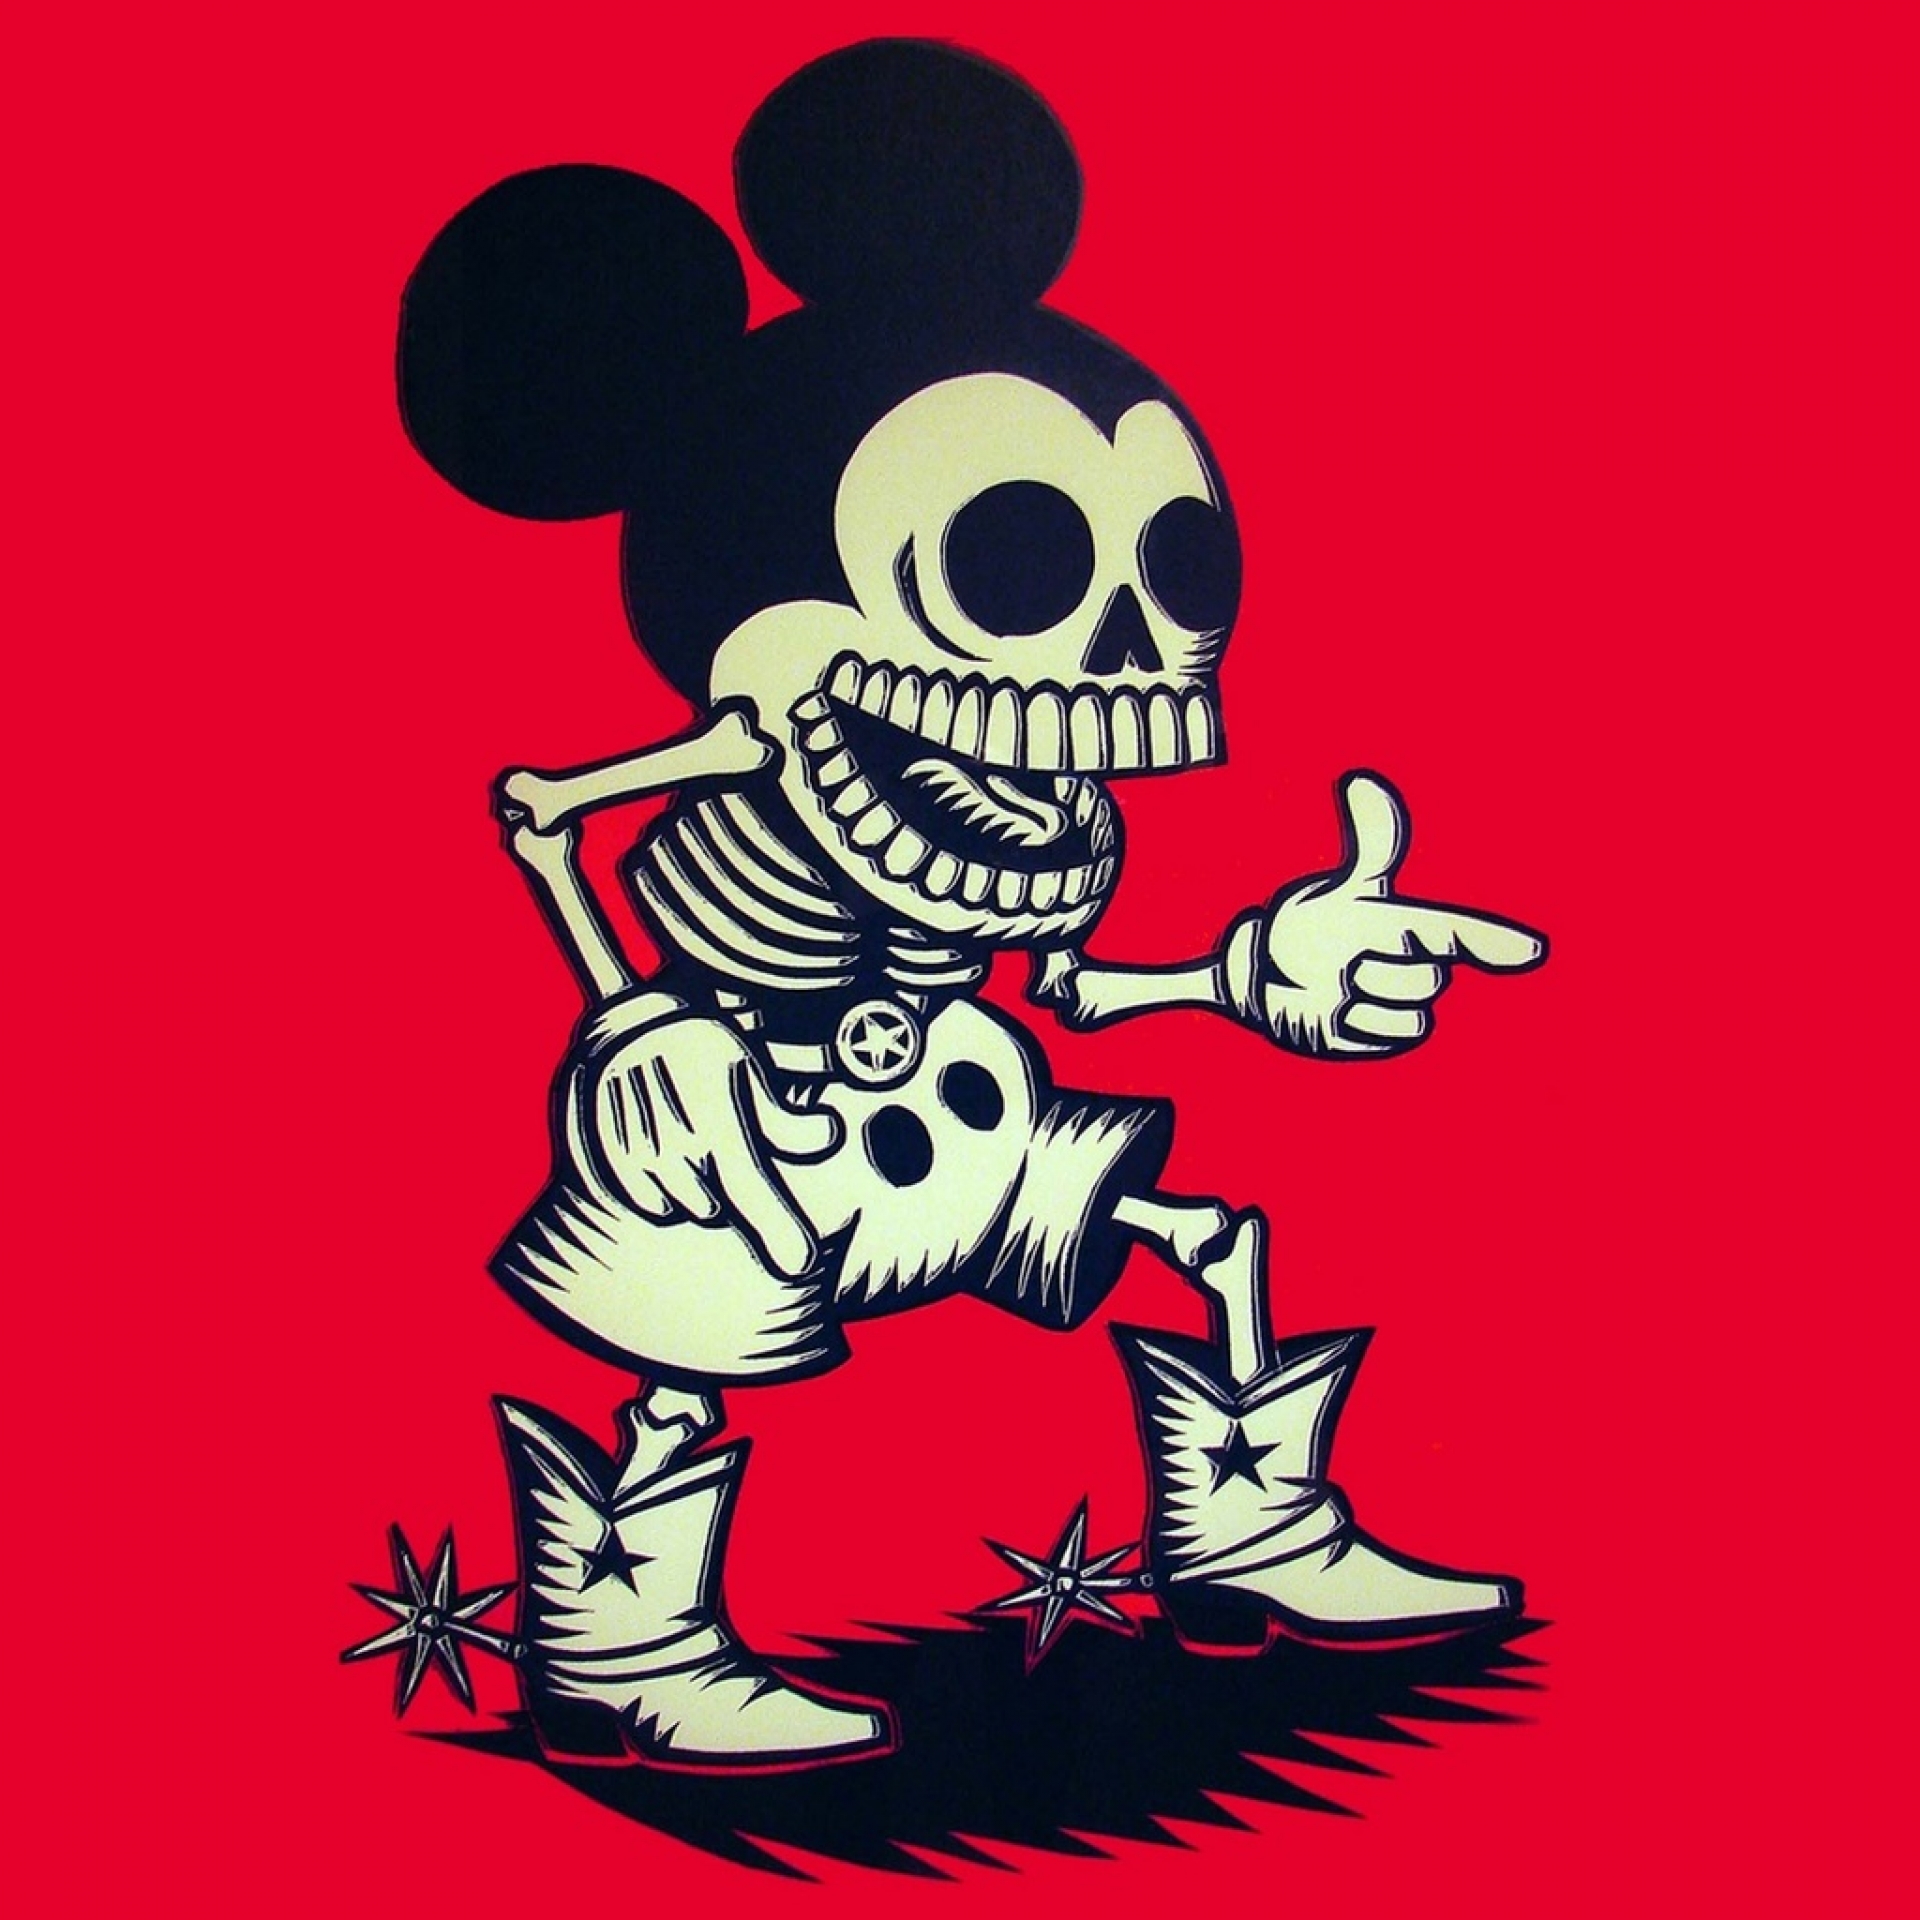 Images For Skeleton Cartoon - Mickey Mouse Skull - HD Wallpaper 